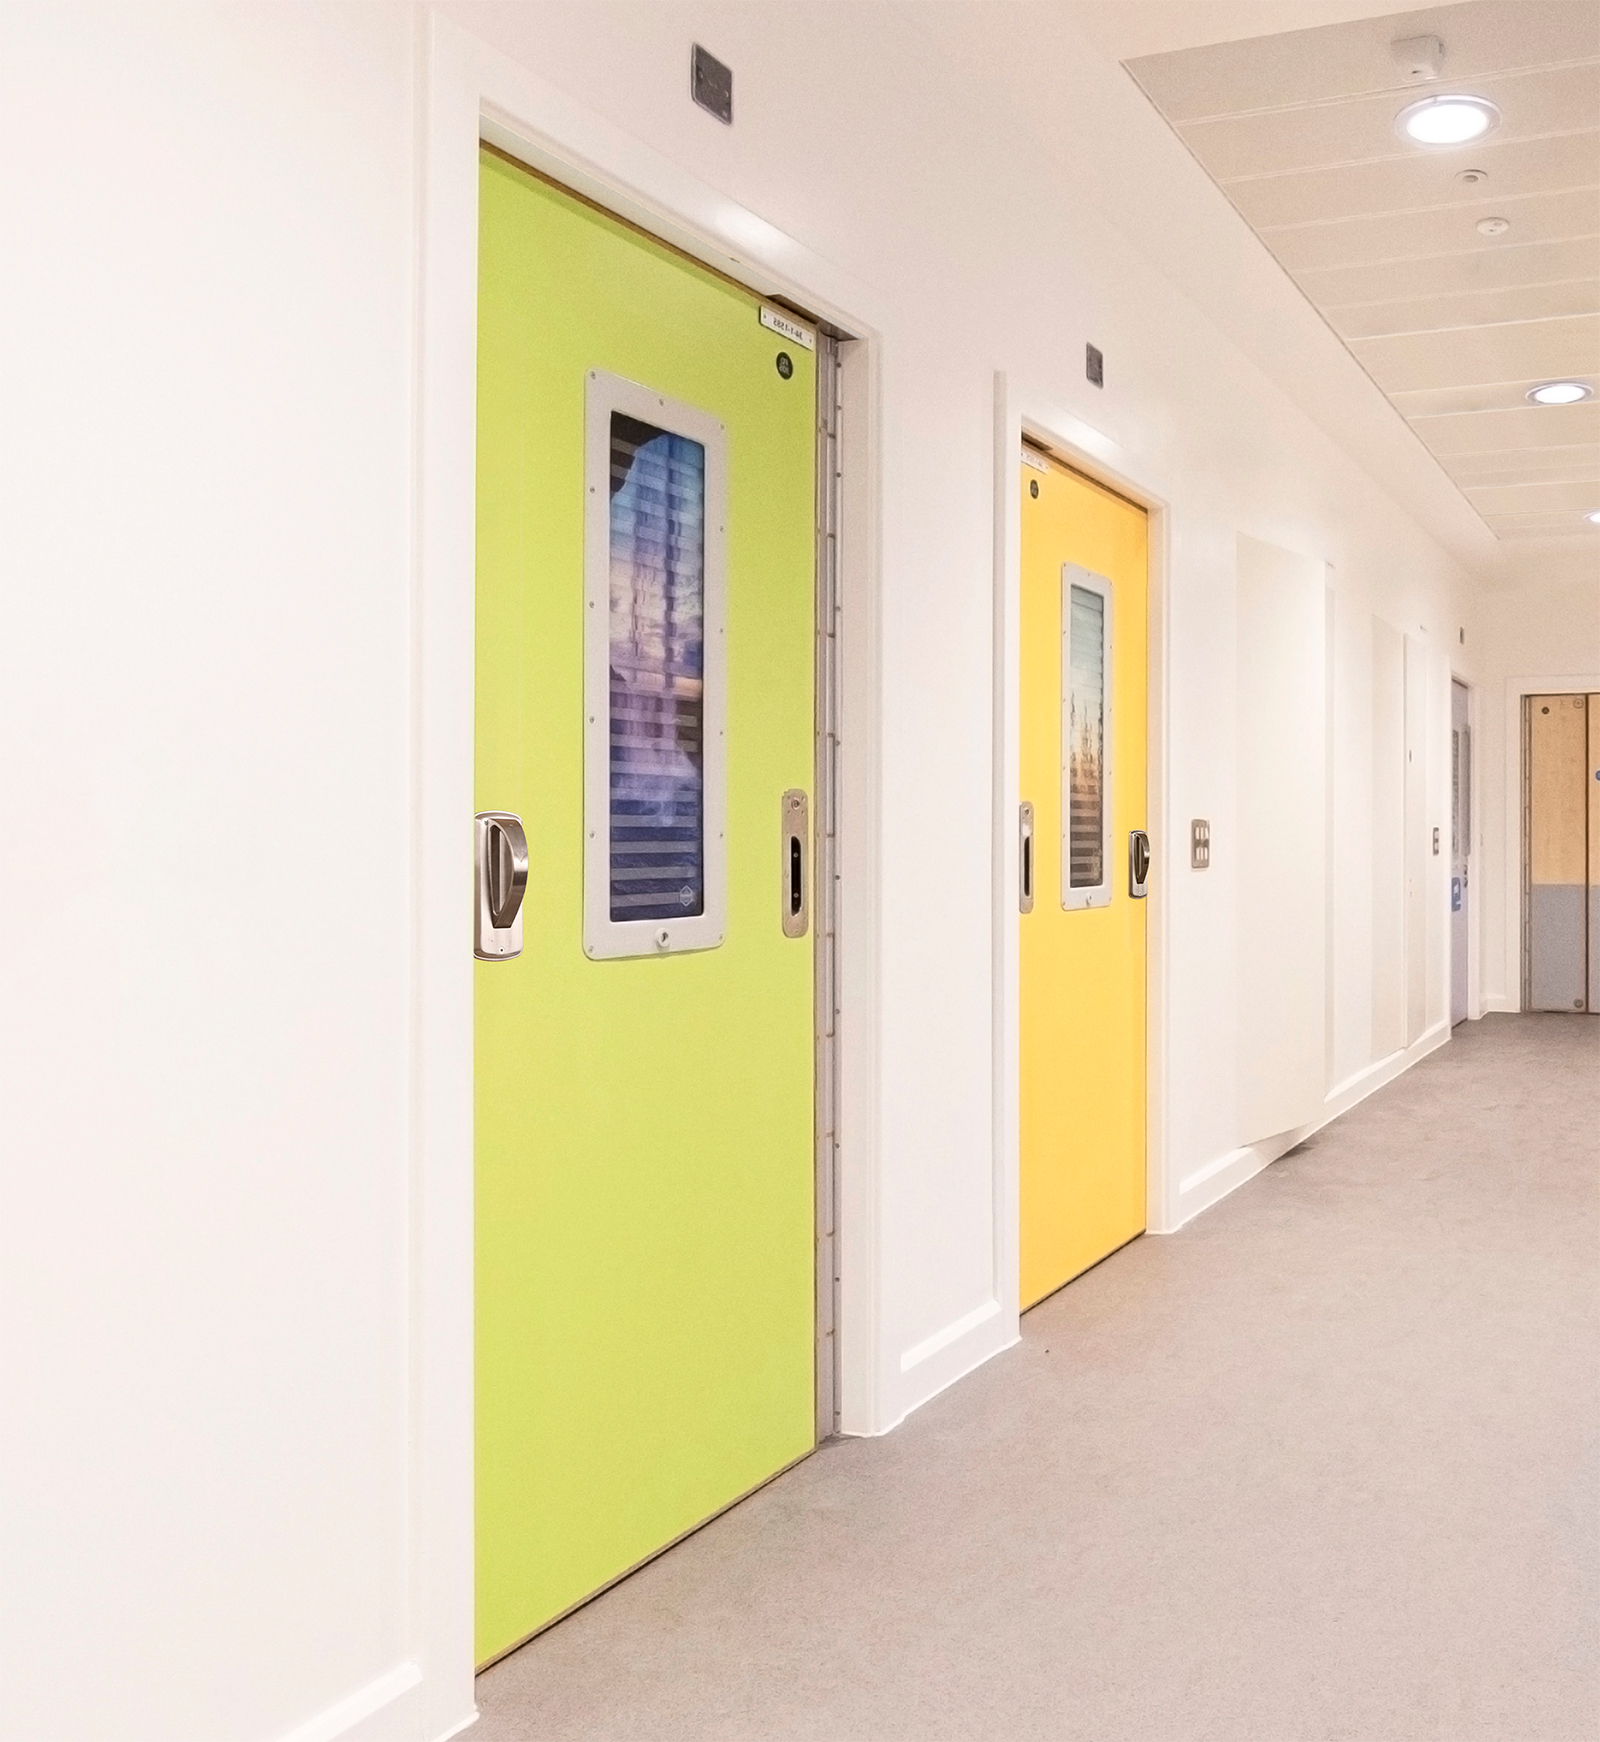 SWITCH Anti-barricade door by Kingsway Group USA for Behavioral Health.